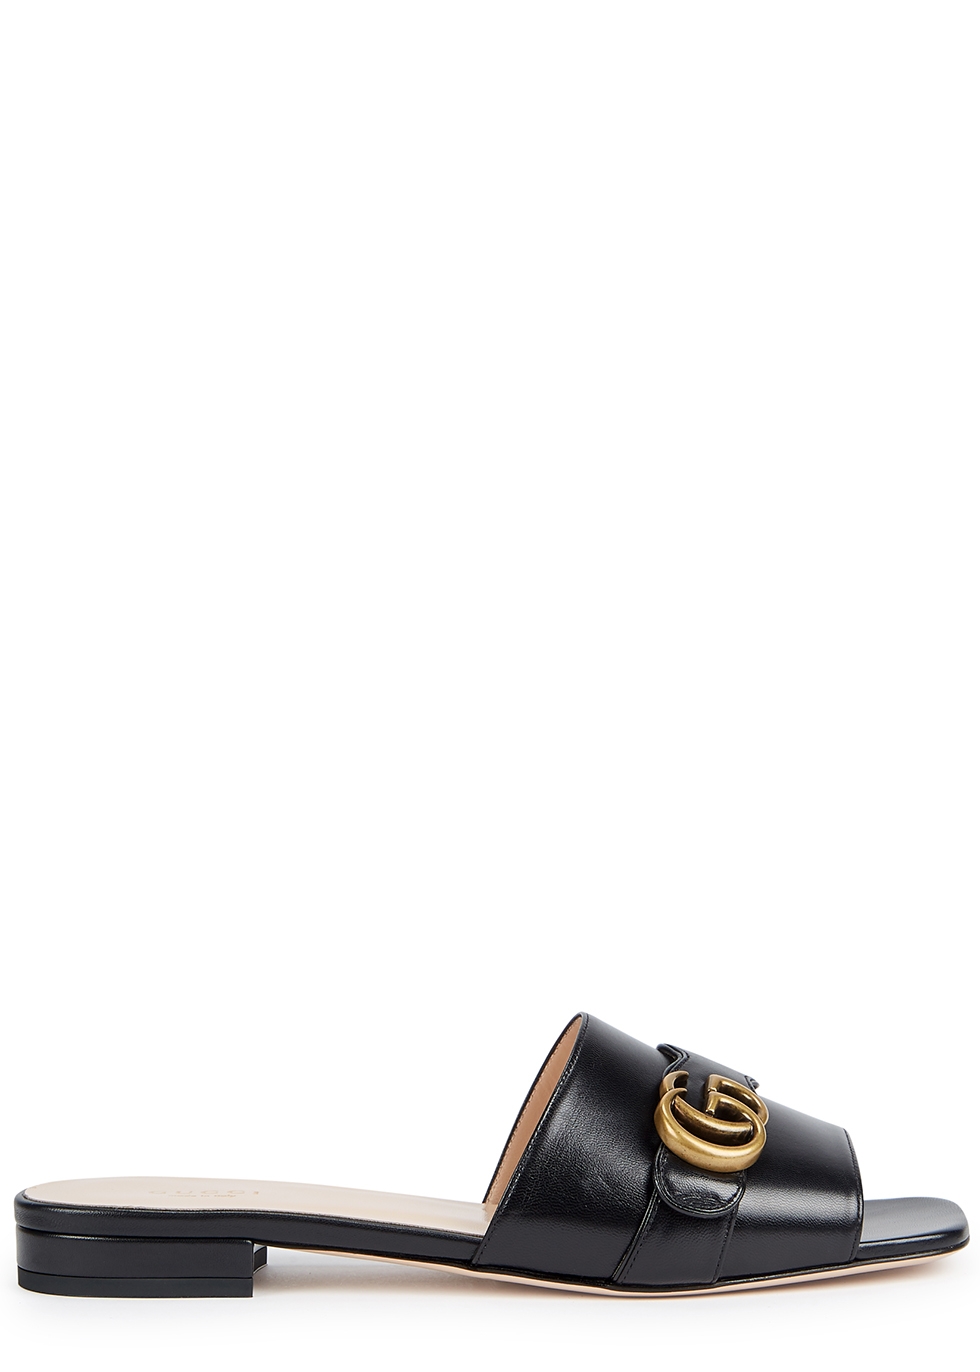 Gucci GG Marmont black leather mules 